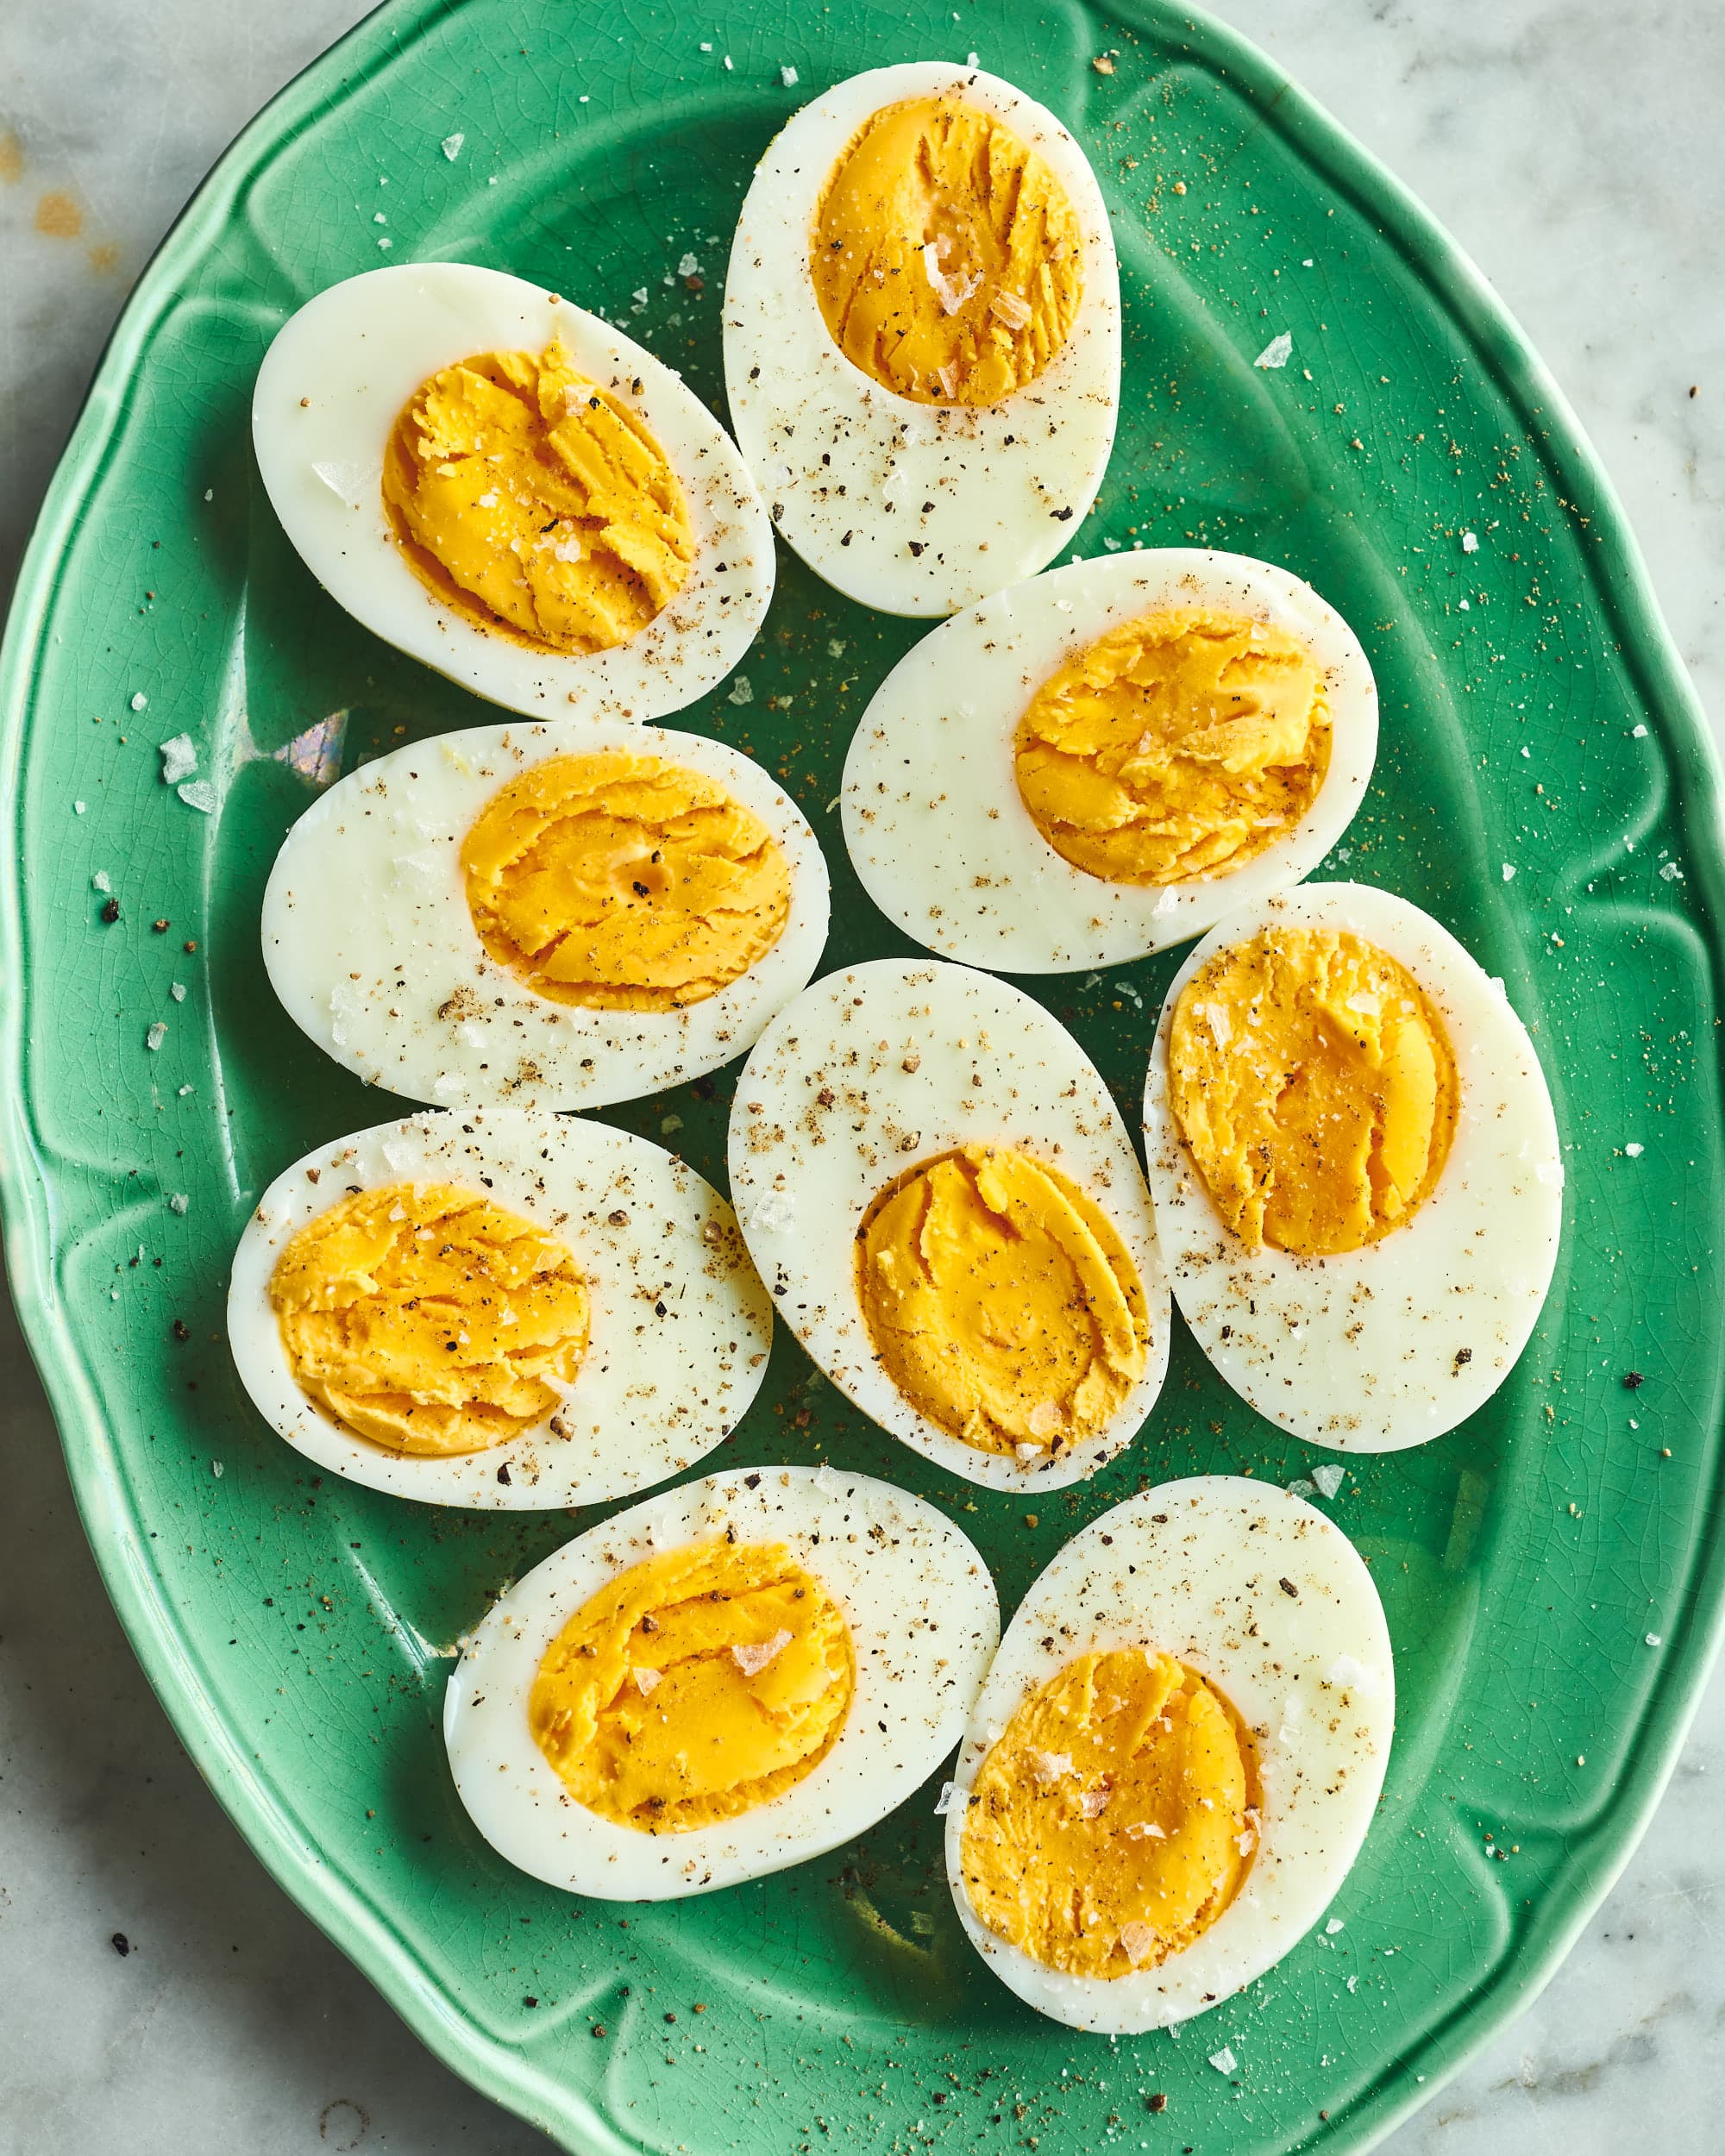 The Gadget Shoppers Love for Making Deviled Eggs Is on Sale for Easter